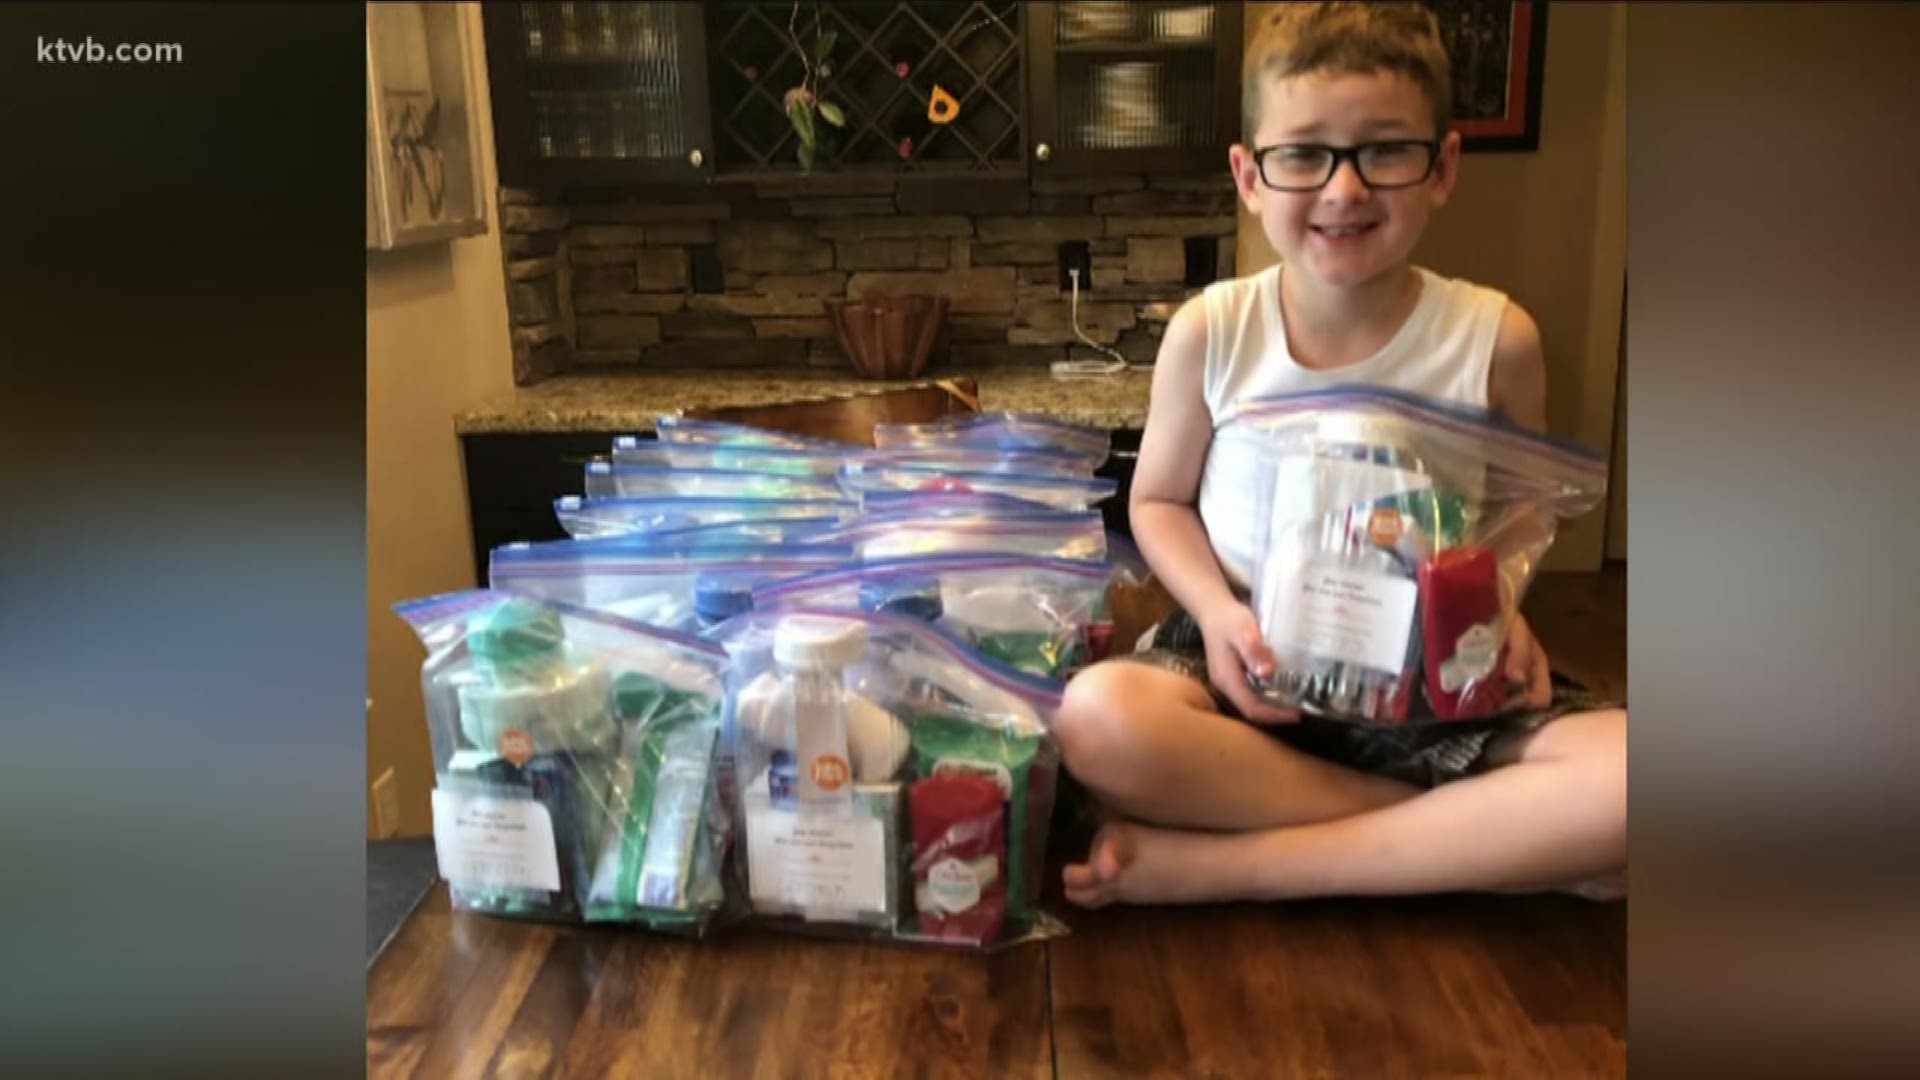 Seven-year-old Cameron uses his allowance to put much-needed supplies into bags for the homeless community. He says passing the kits out makes him happy.